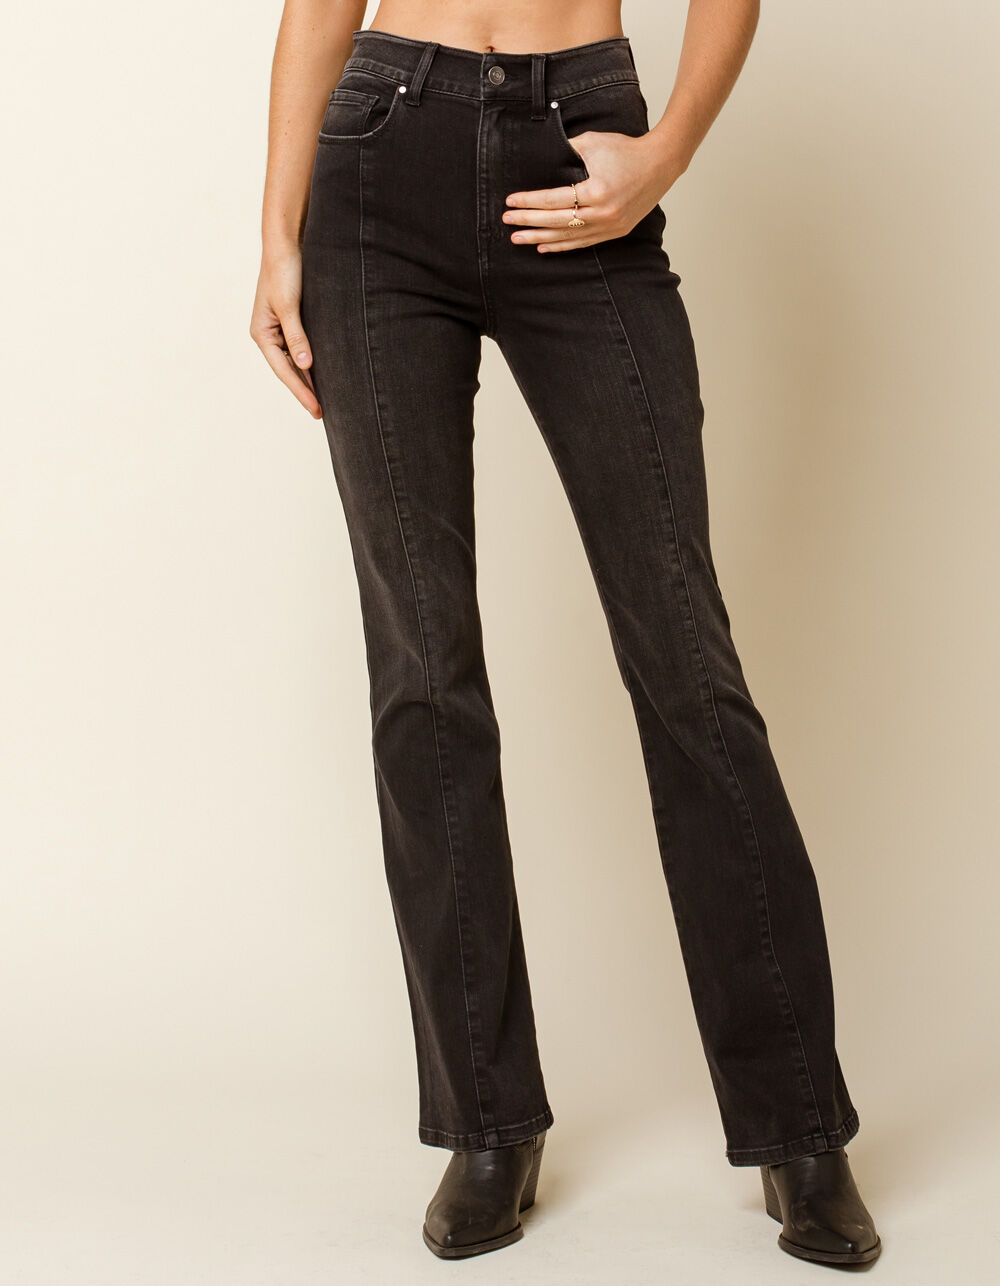 WEST OF MELROSE Say You'll Be Flare Seam Womens Jeans - BLACK | Tillys